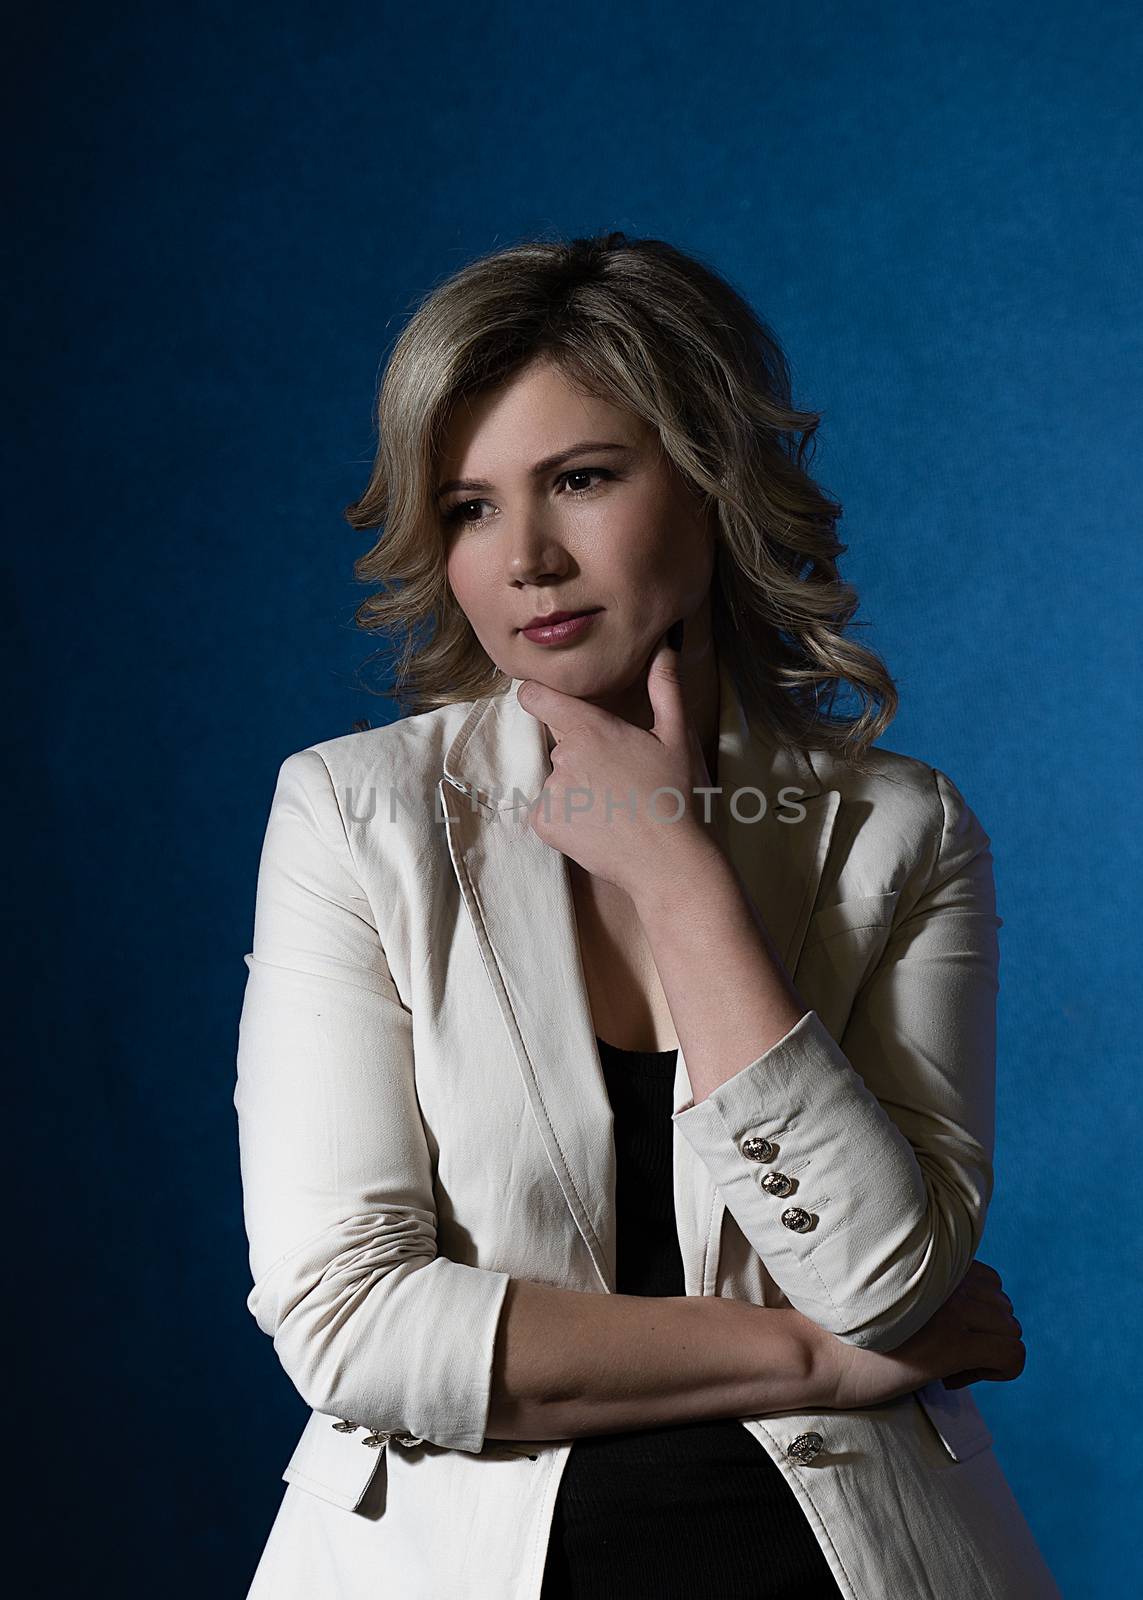 30 years old woman with blond hair in business clothes posing in the studio on a dark background